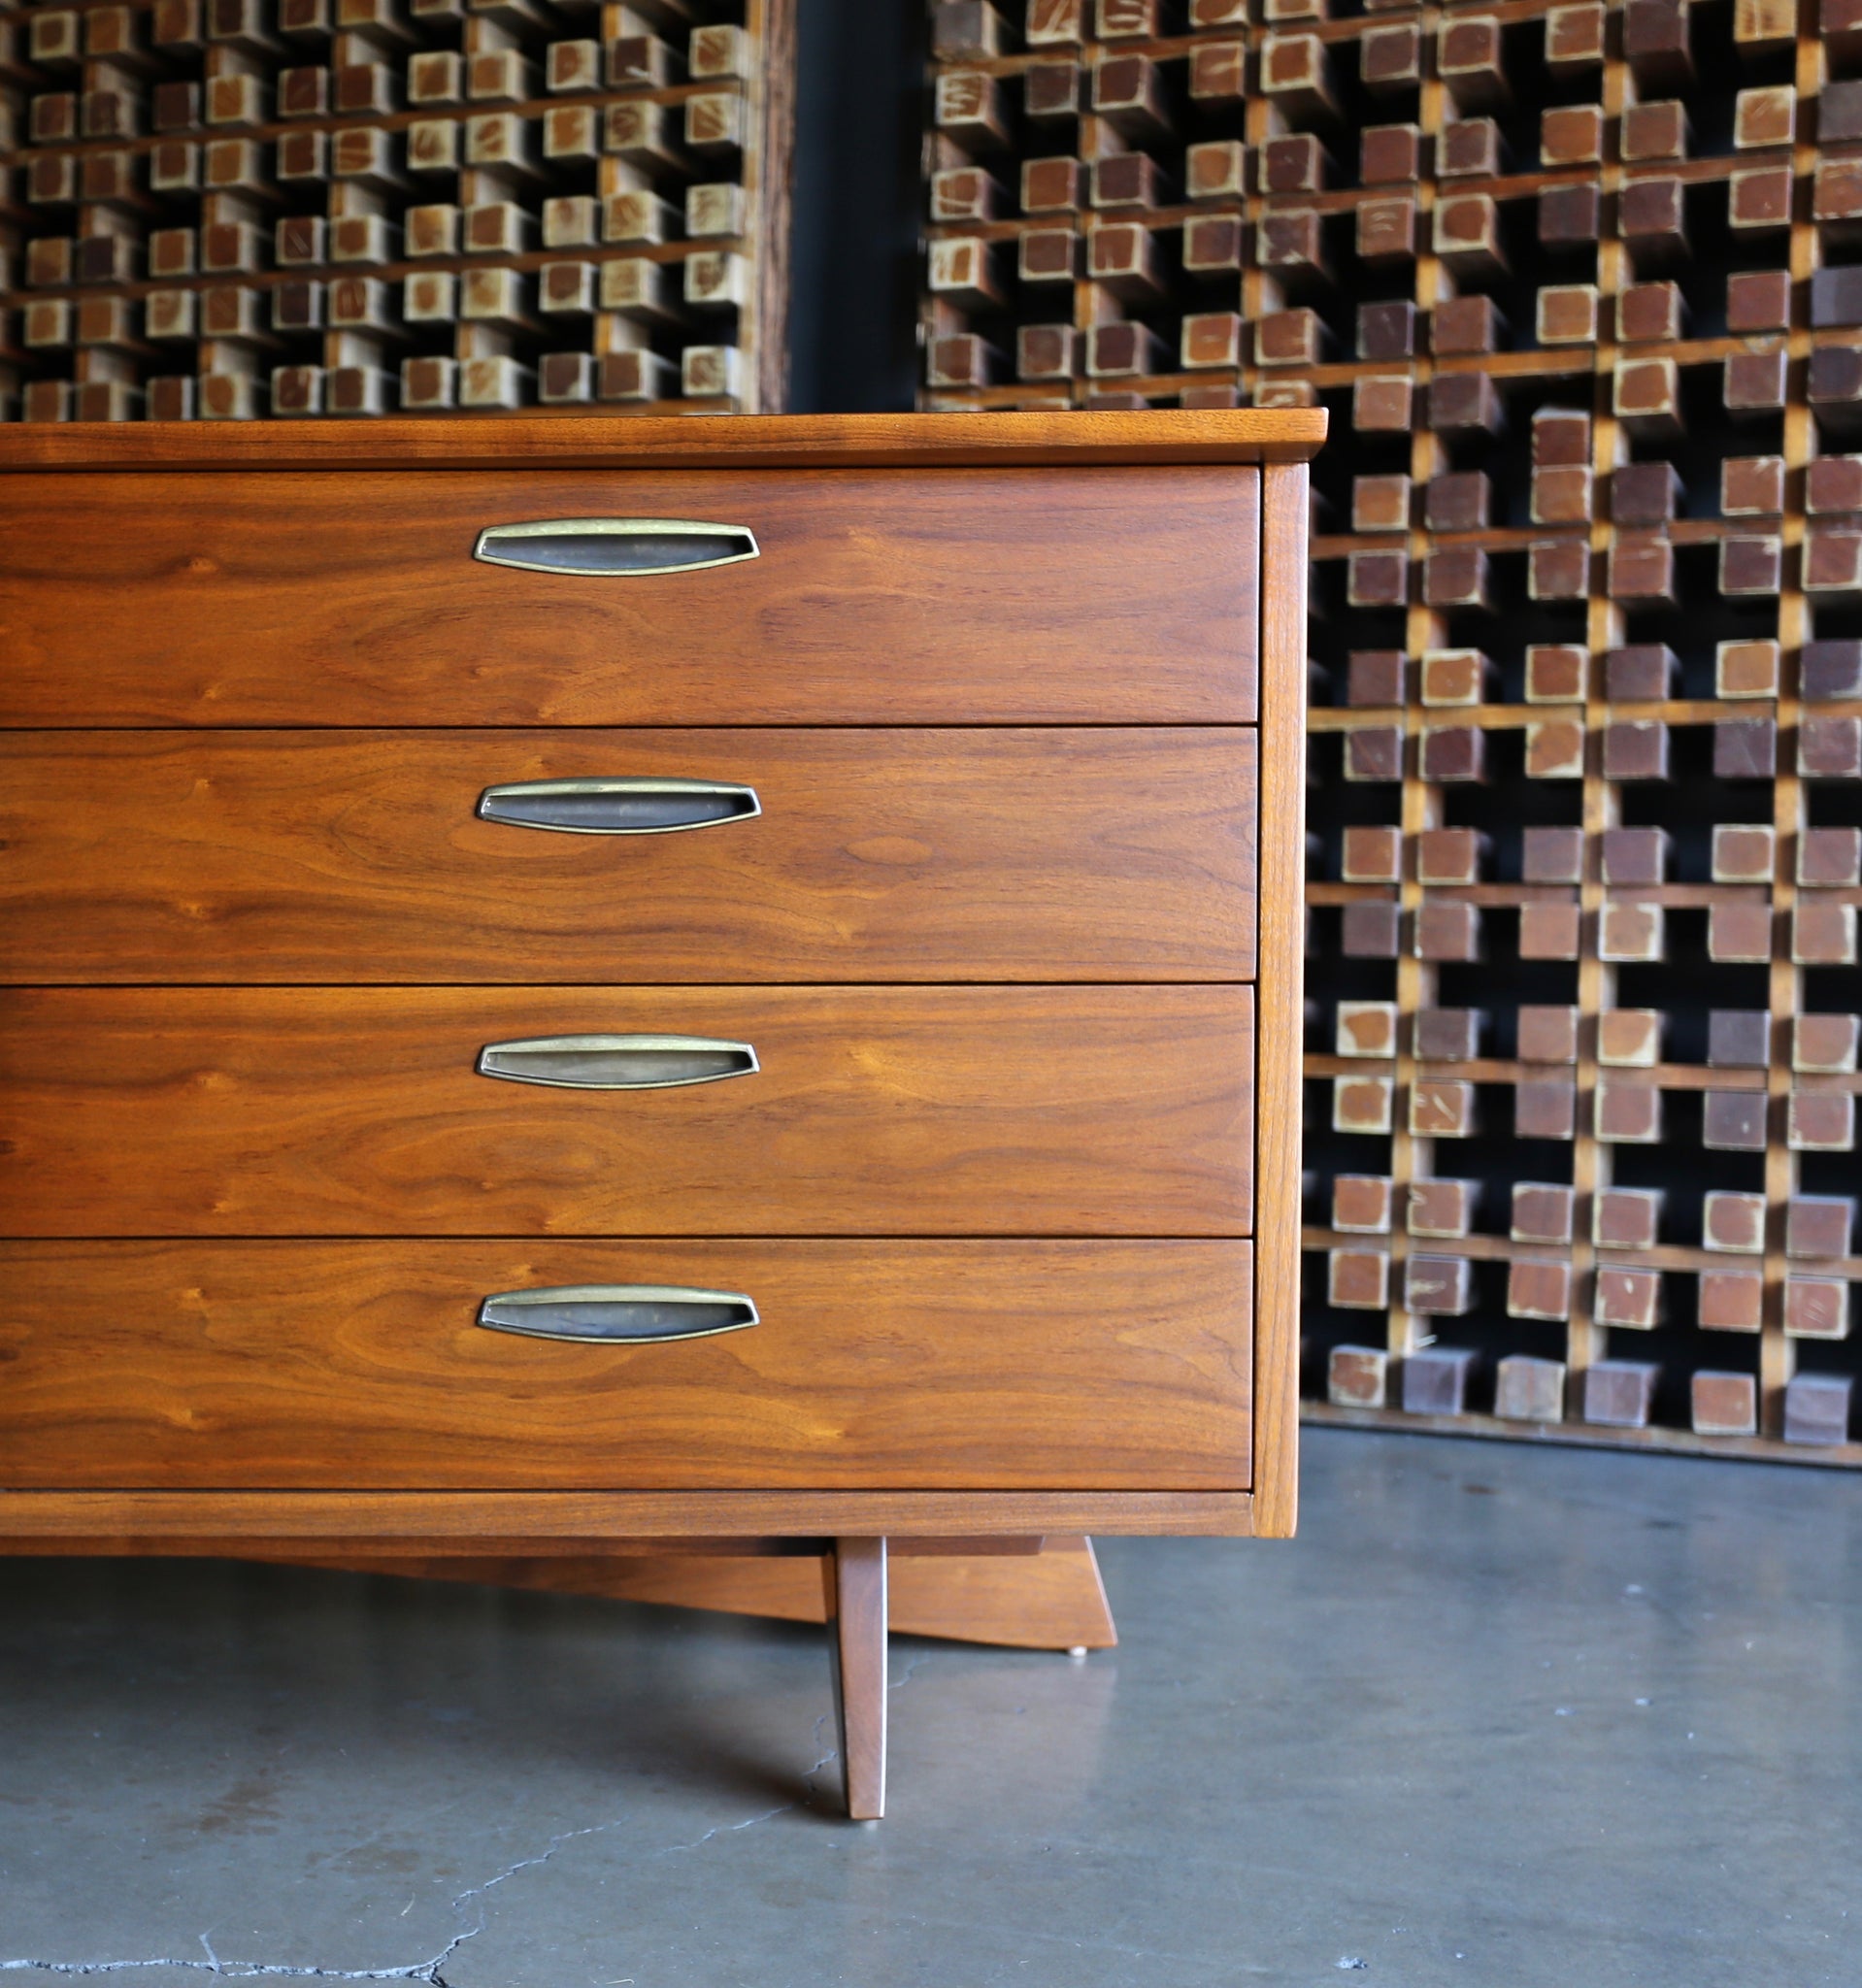 = SOLD = George Nakashima Chest for Widdicomb, 1959